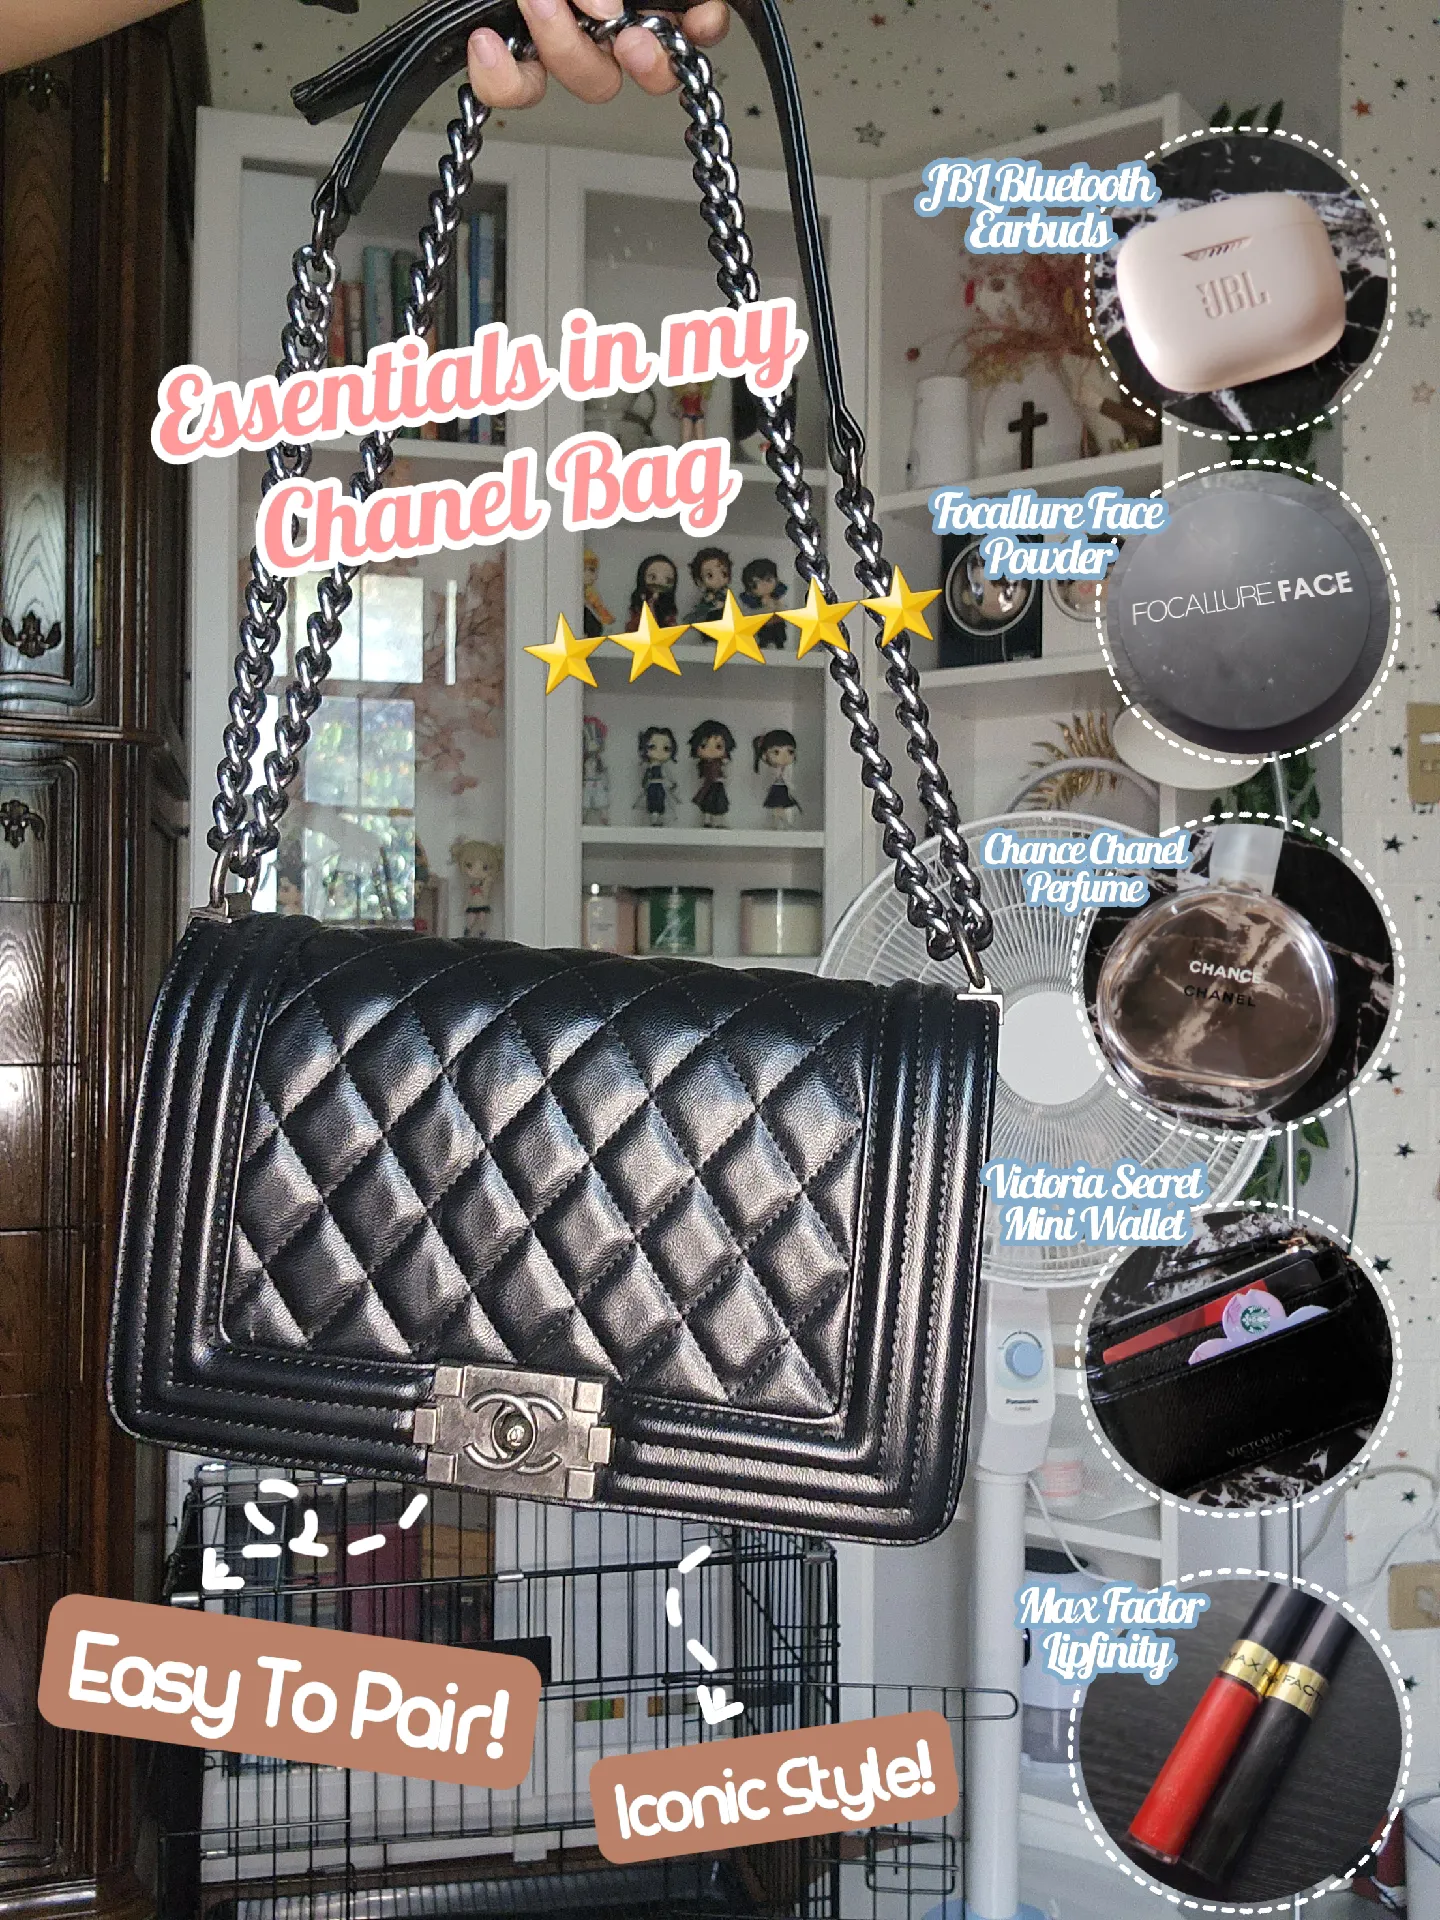 Where Are Chanel Bags Made and How? - Handbagholic